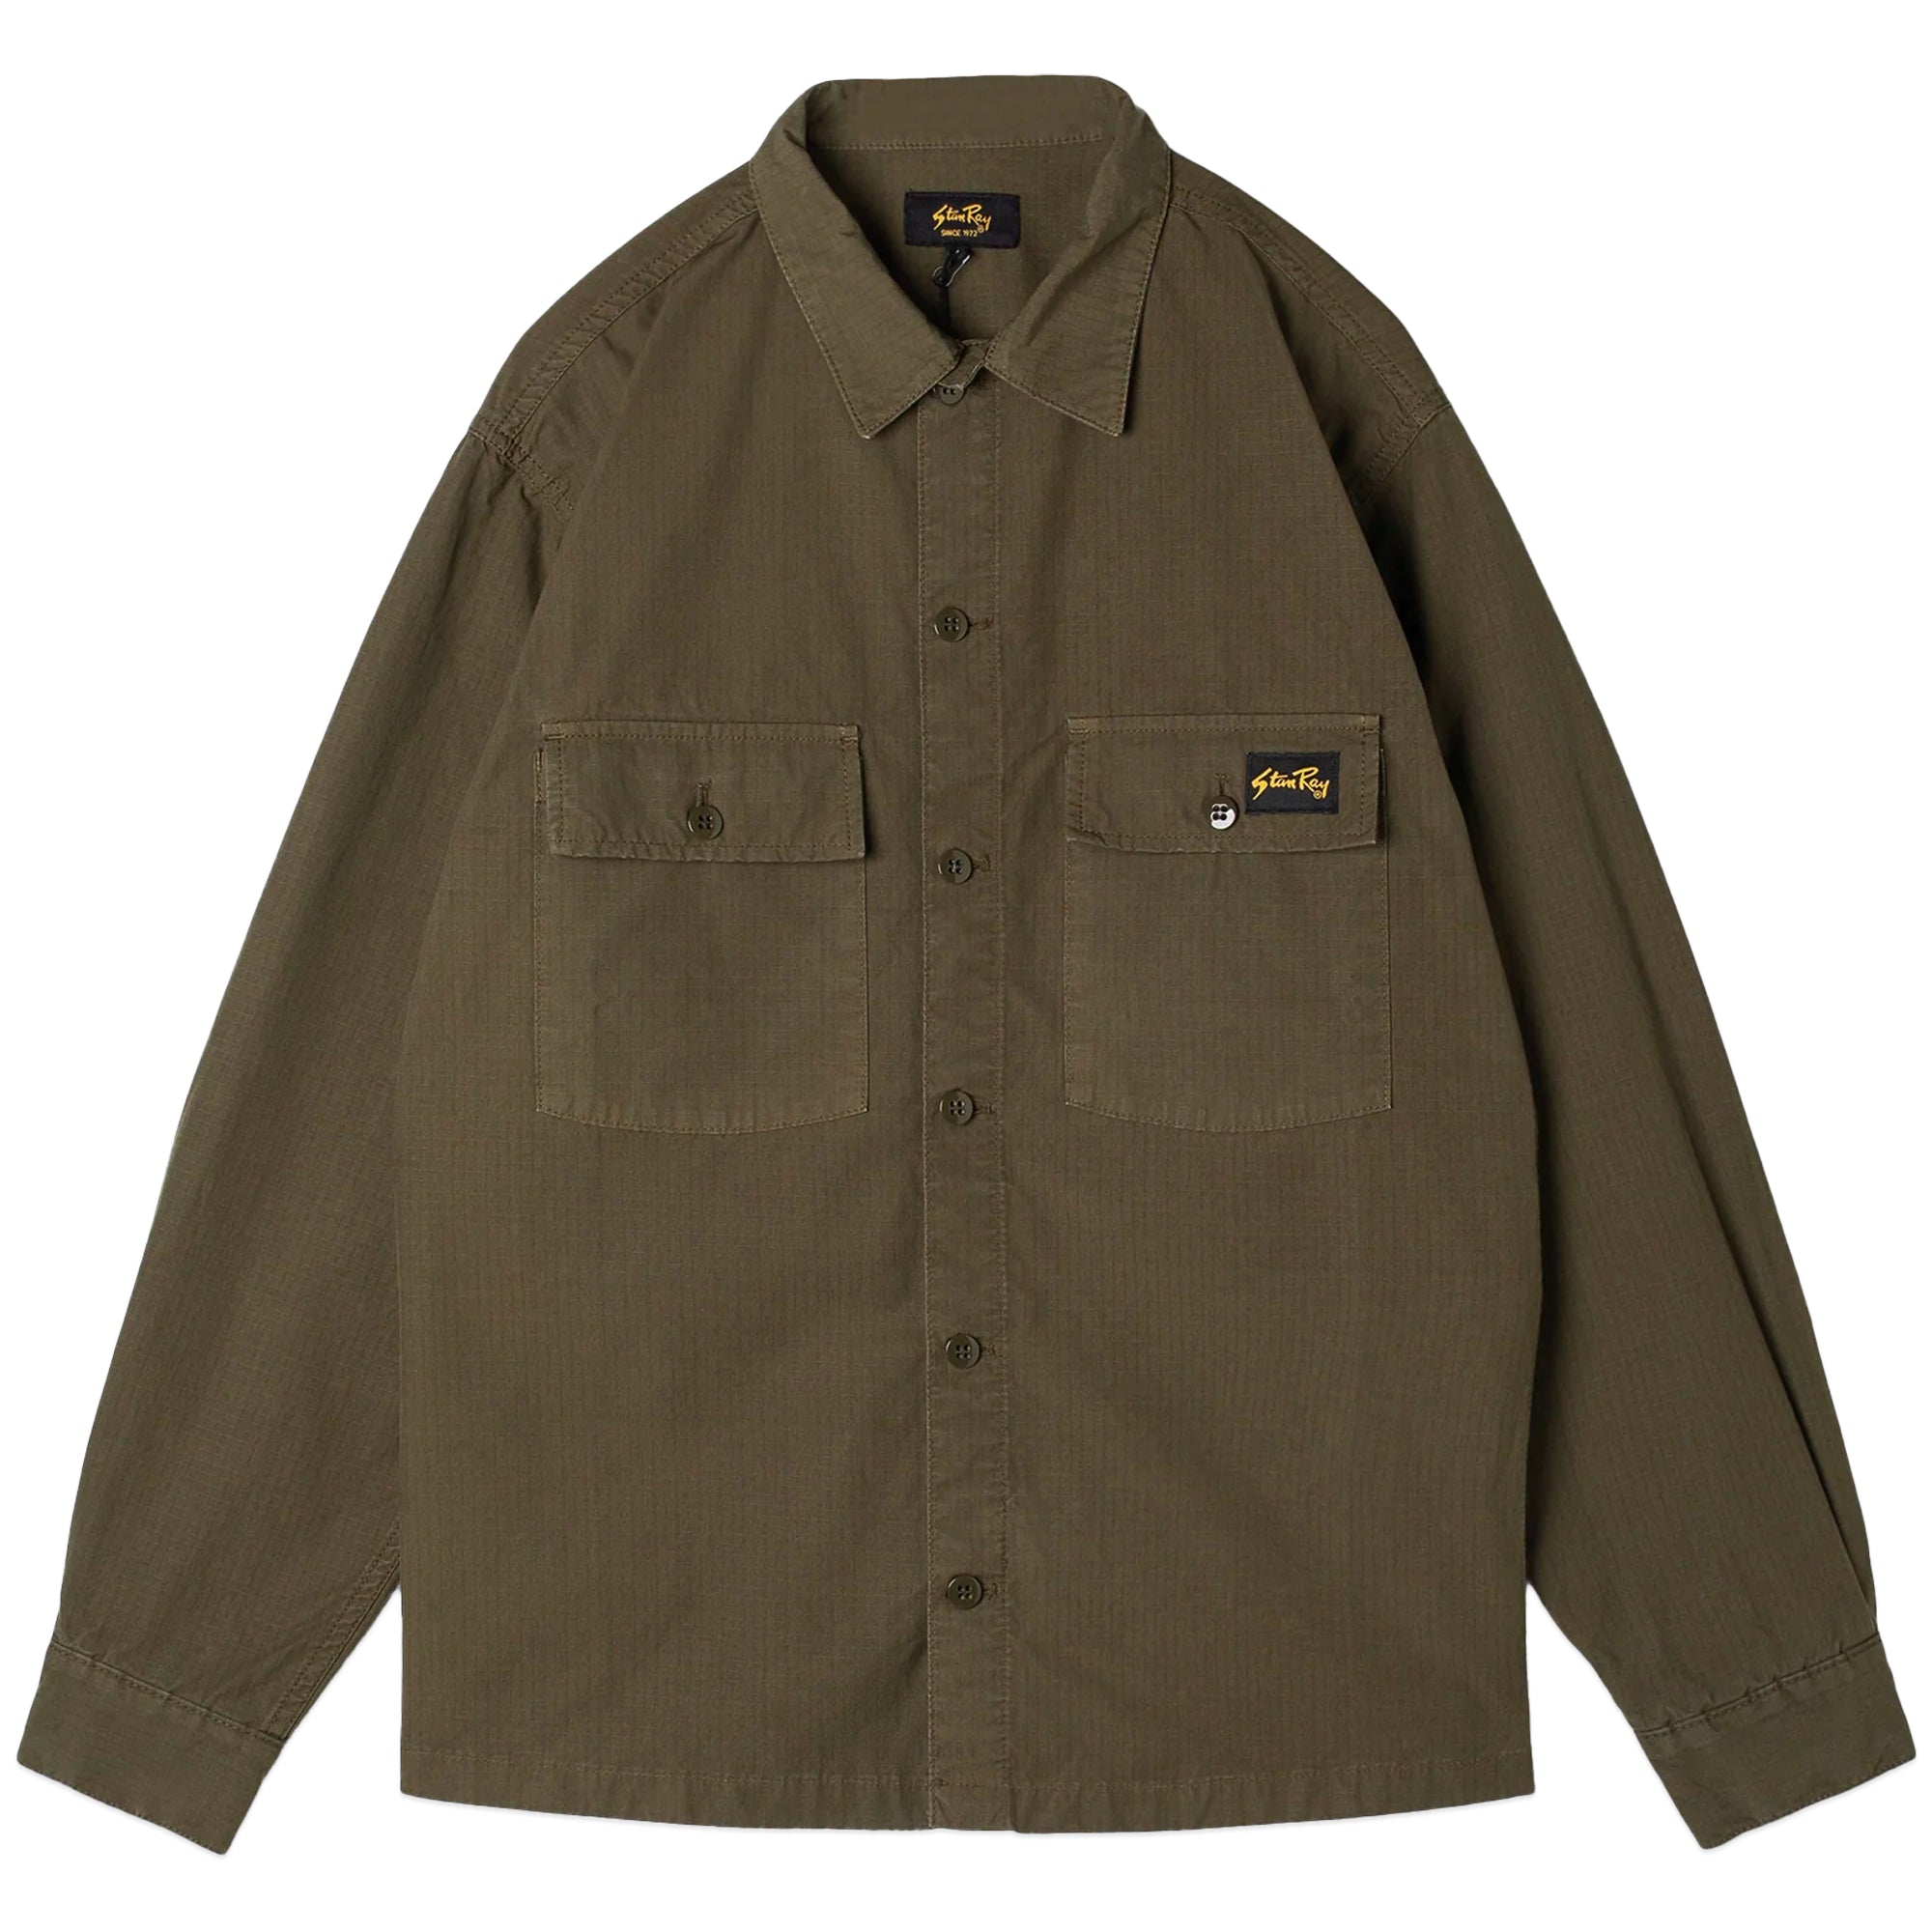 Stan Ray CPO Shirt - Olive Ripstop